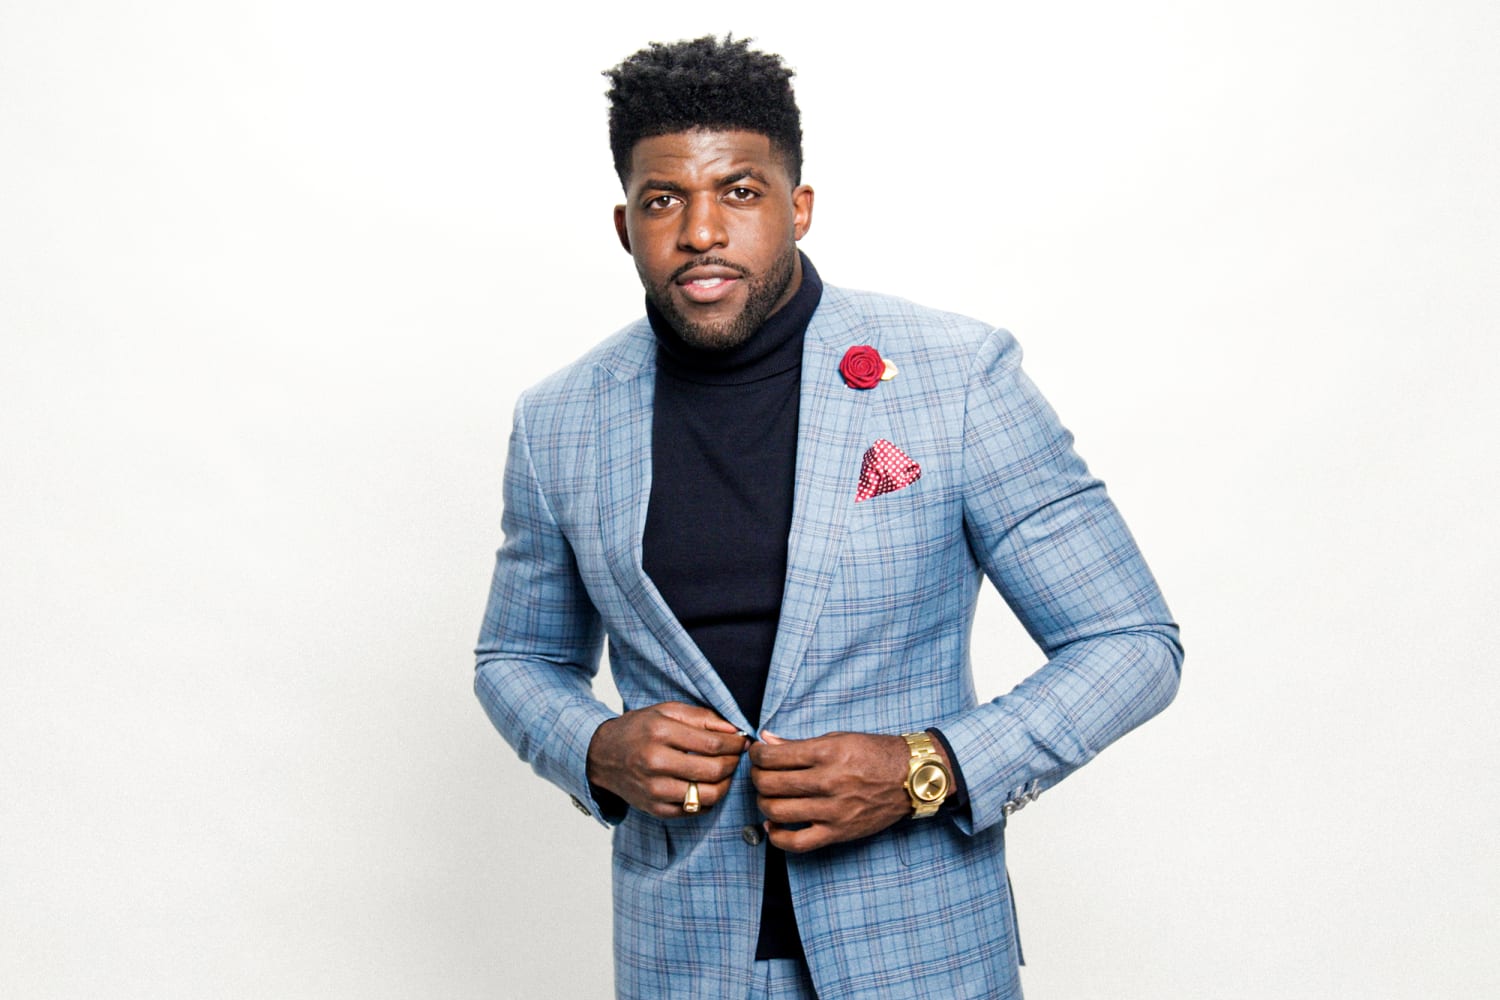 Emmanuel Acho to Replace Chris Harrison on “The Bachelor: After the Final Rose” After Racism Controversy